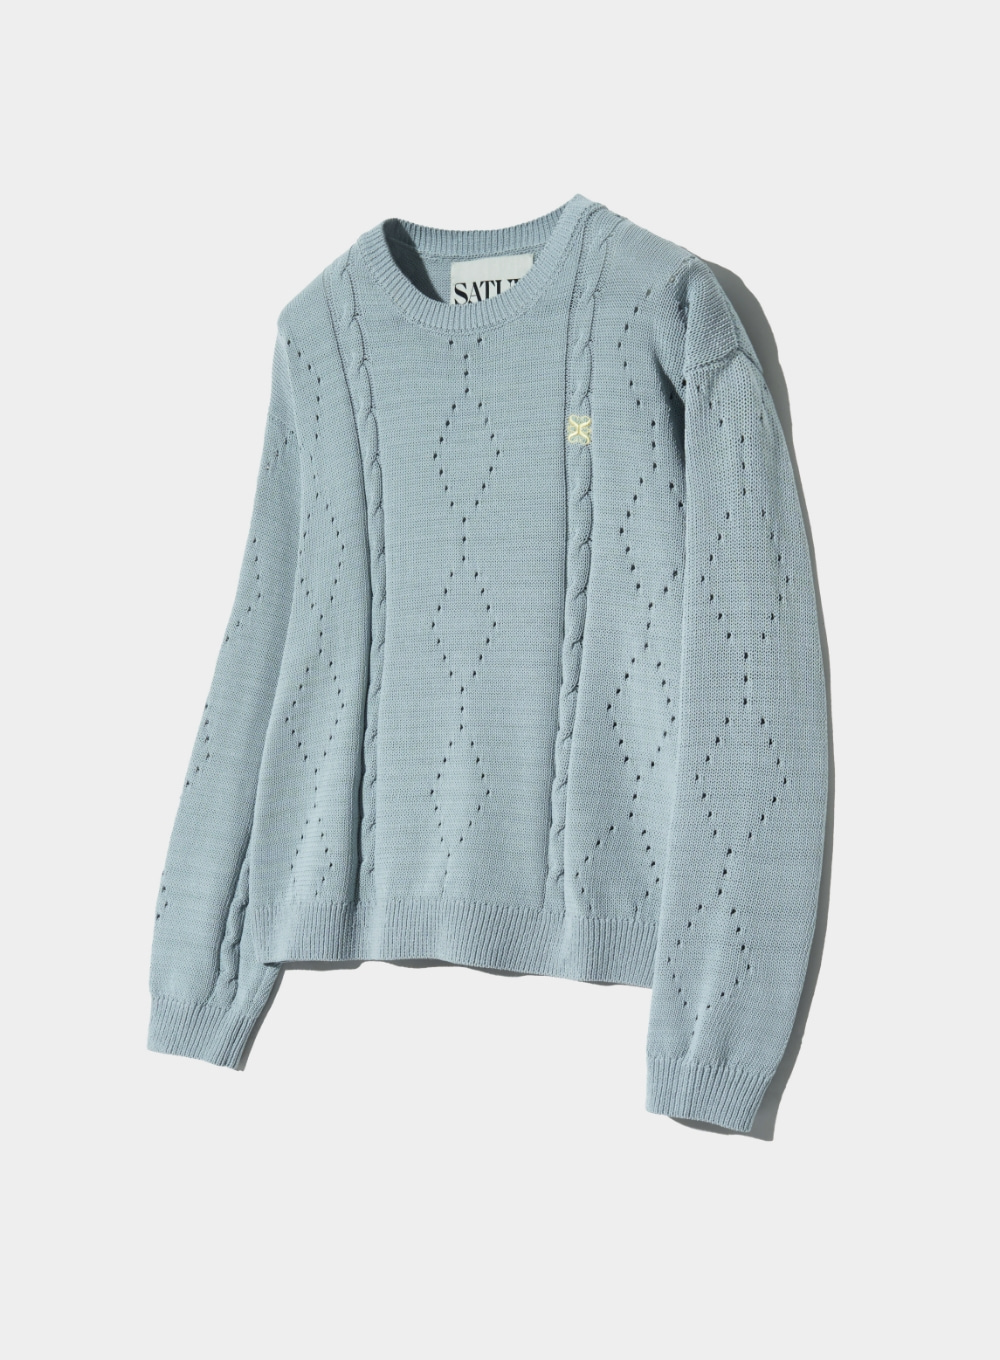 Rhombus Punching Cable Knit - Sky Blue